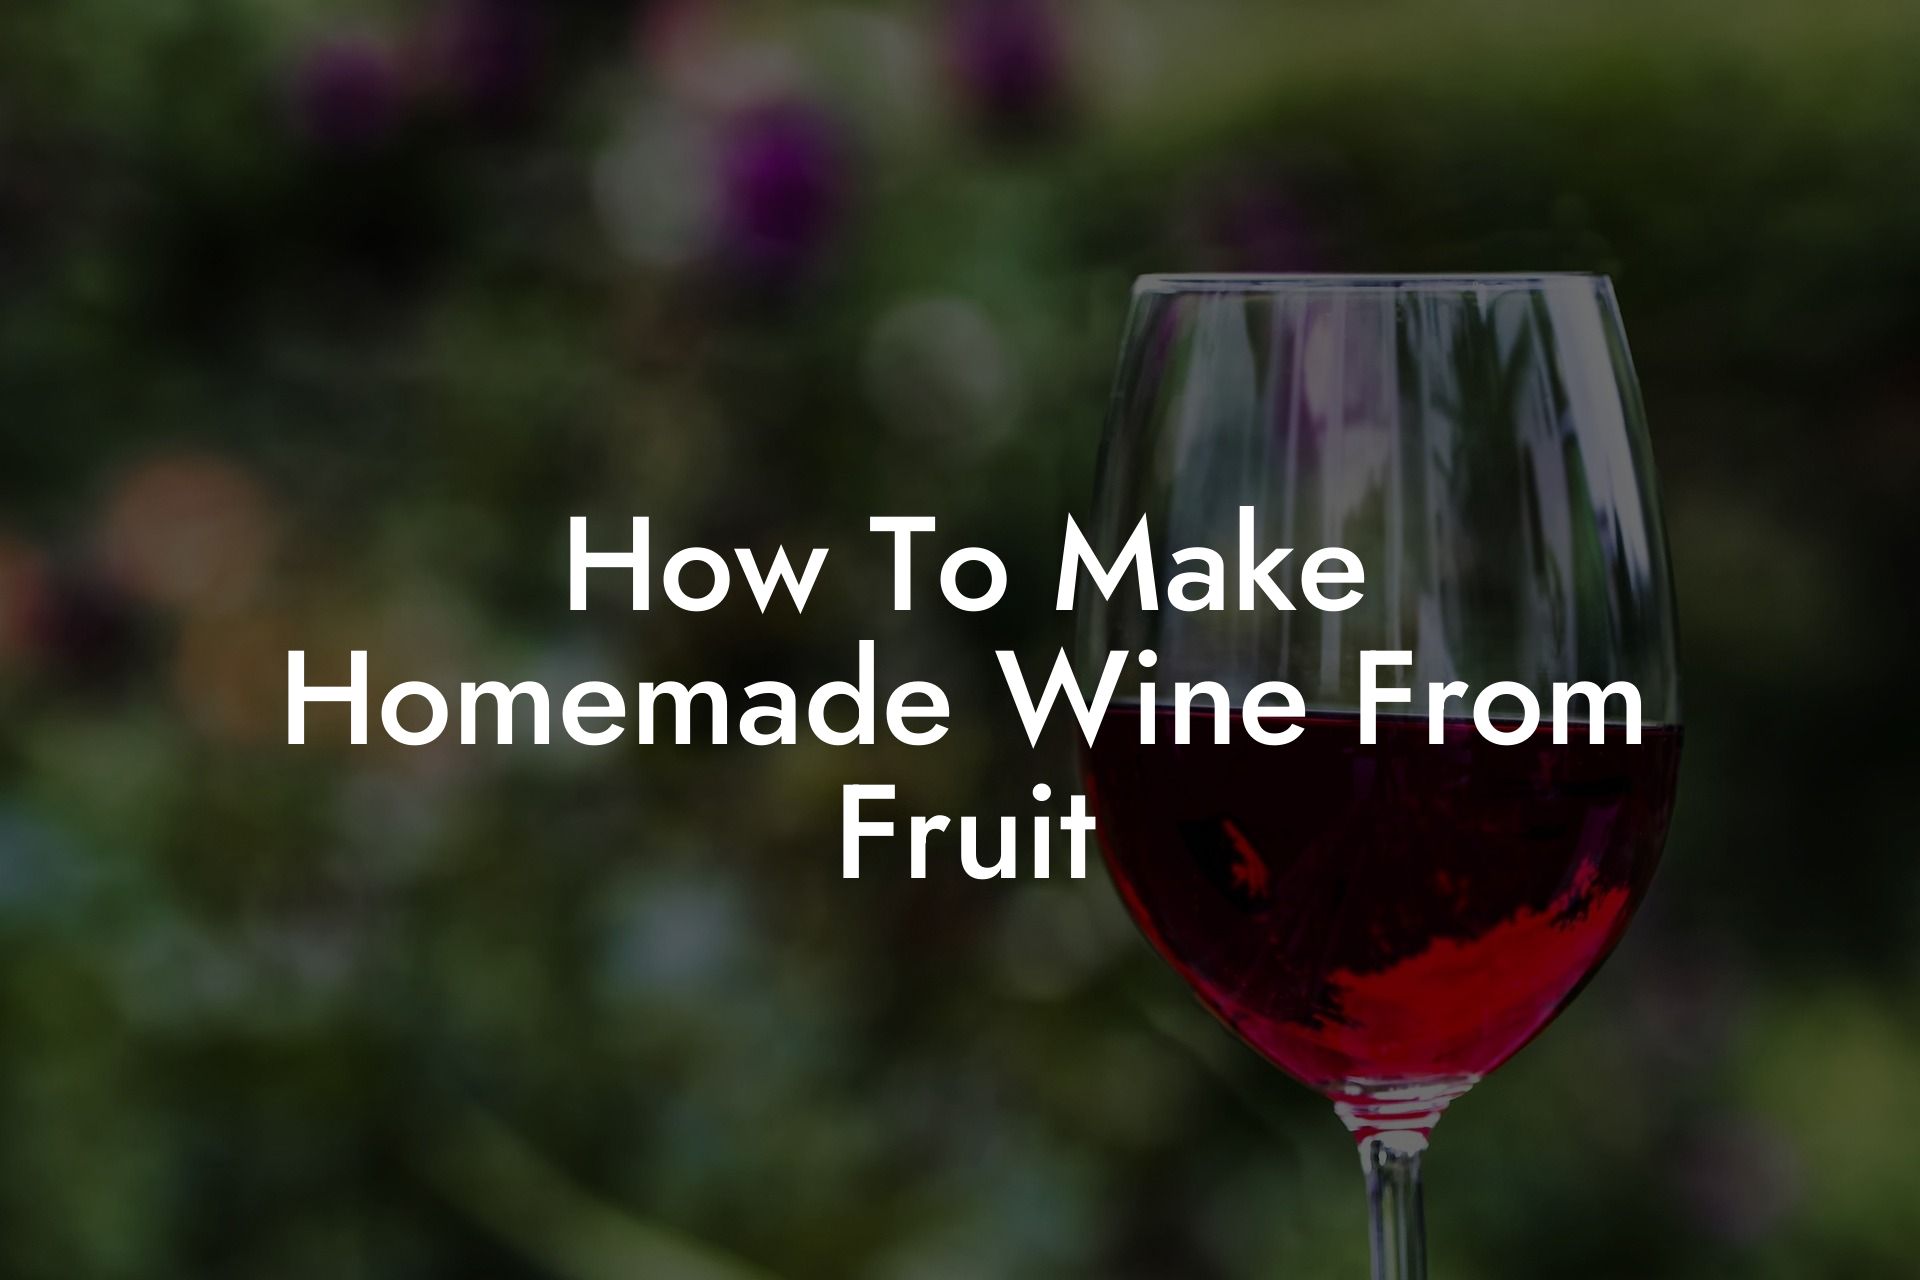 How To Make Homemade Wine From Fruit